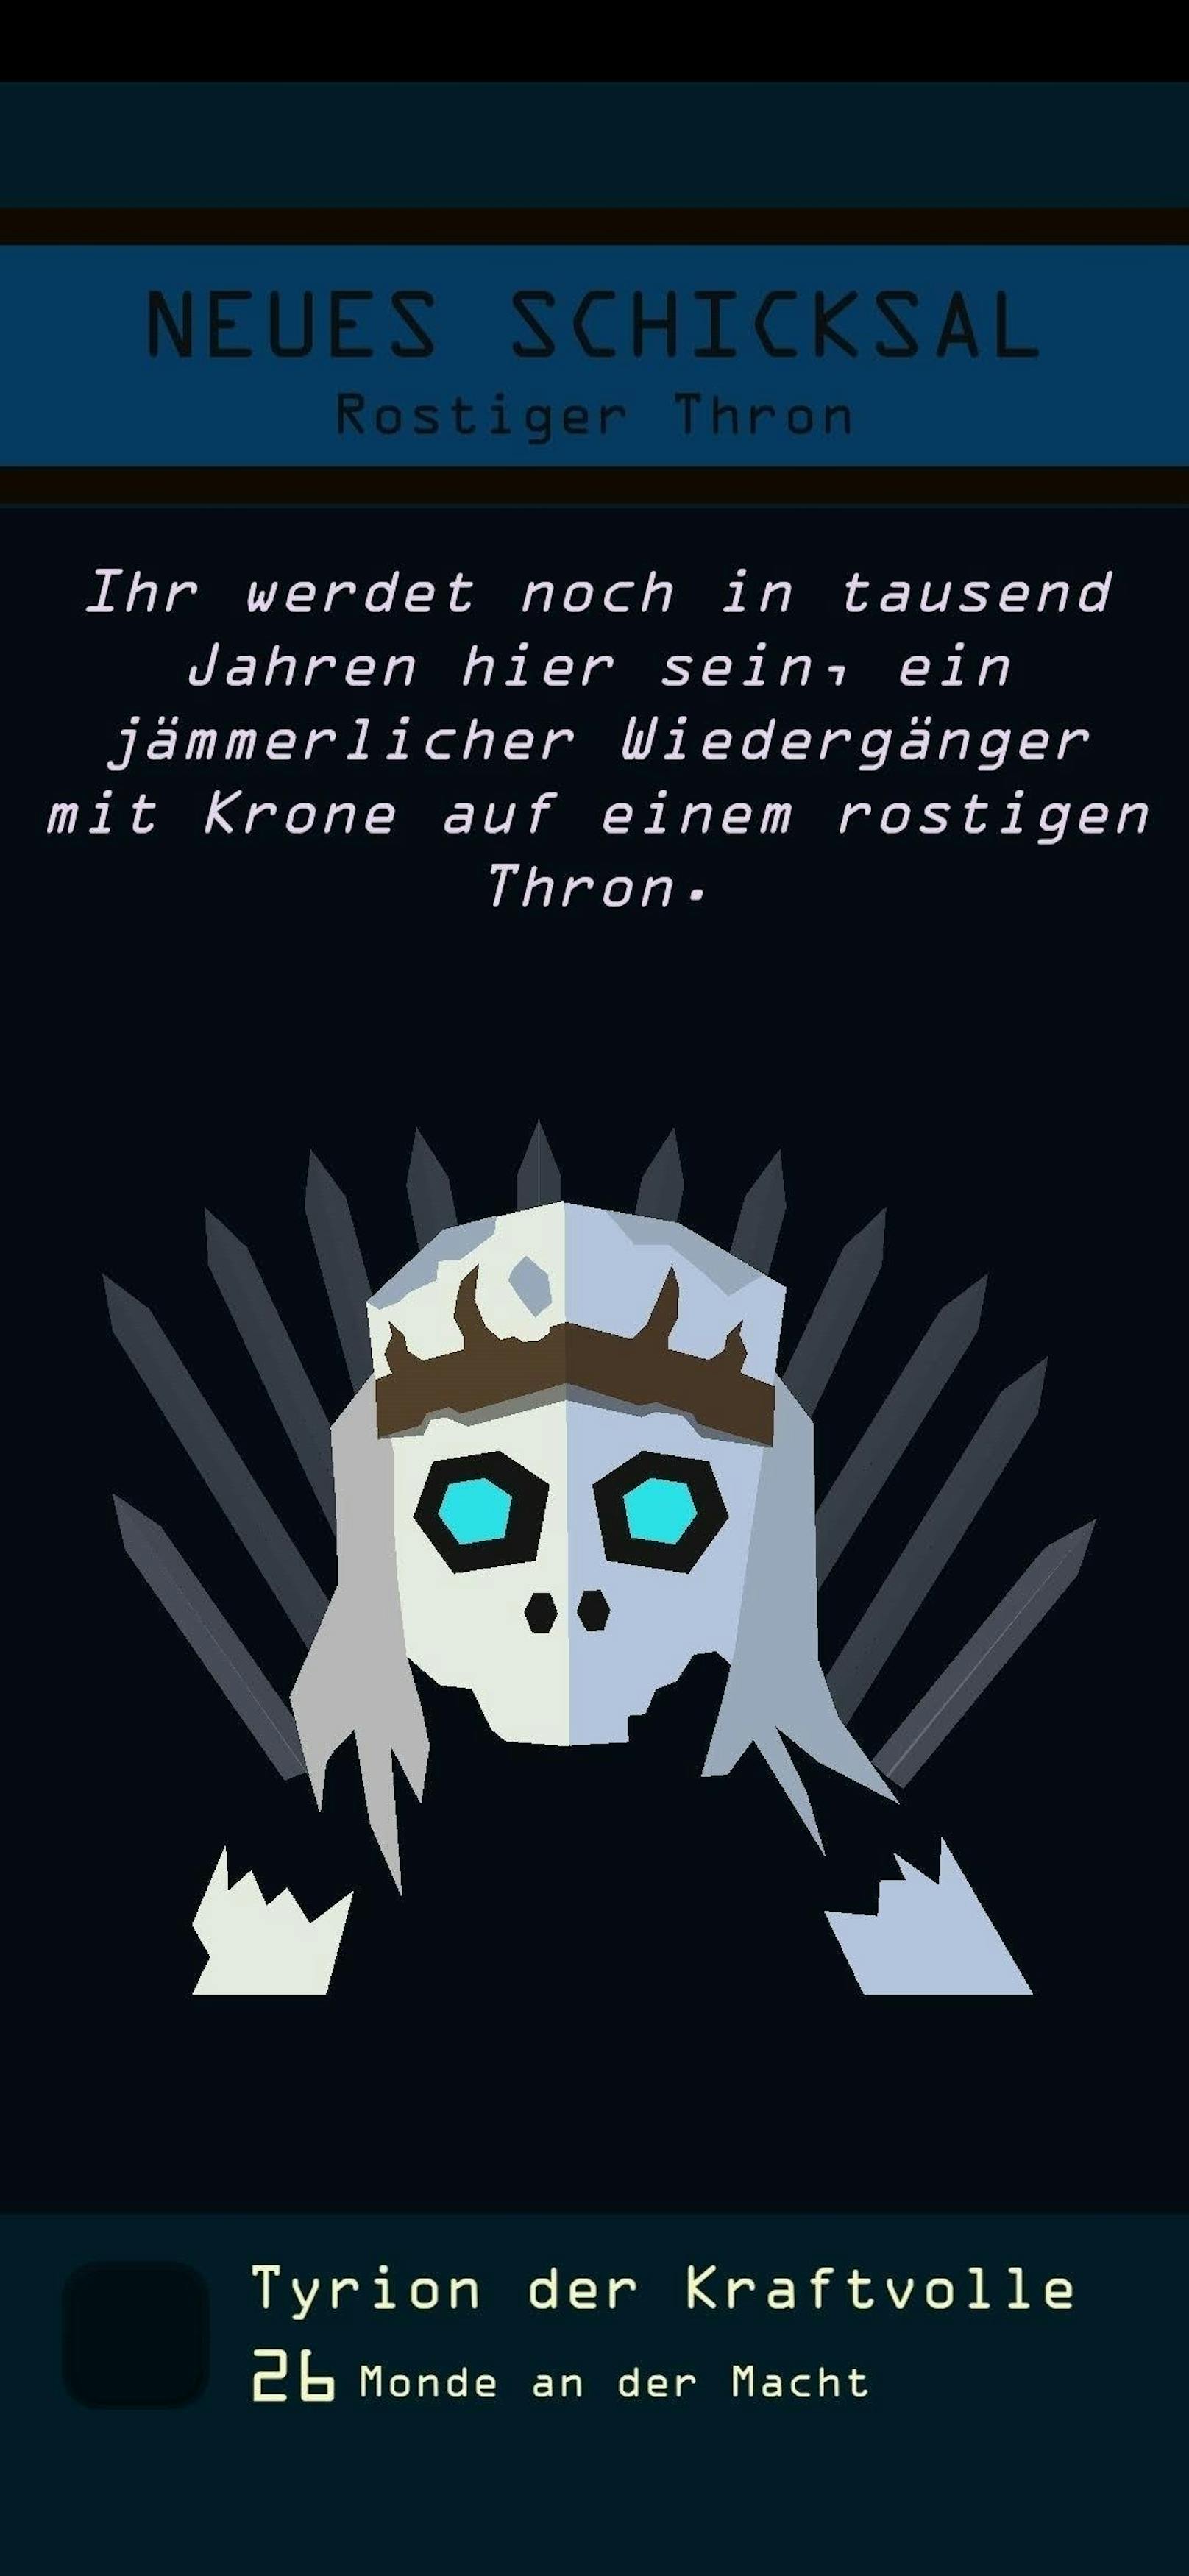  <a href="https://www.heute.at/digital/games/story/Reigns--Game-of-Thrones-im-Test-50948071" target="_blank">Reigns: Game of Thrones</a>